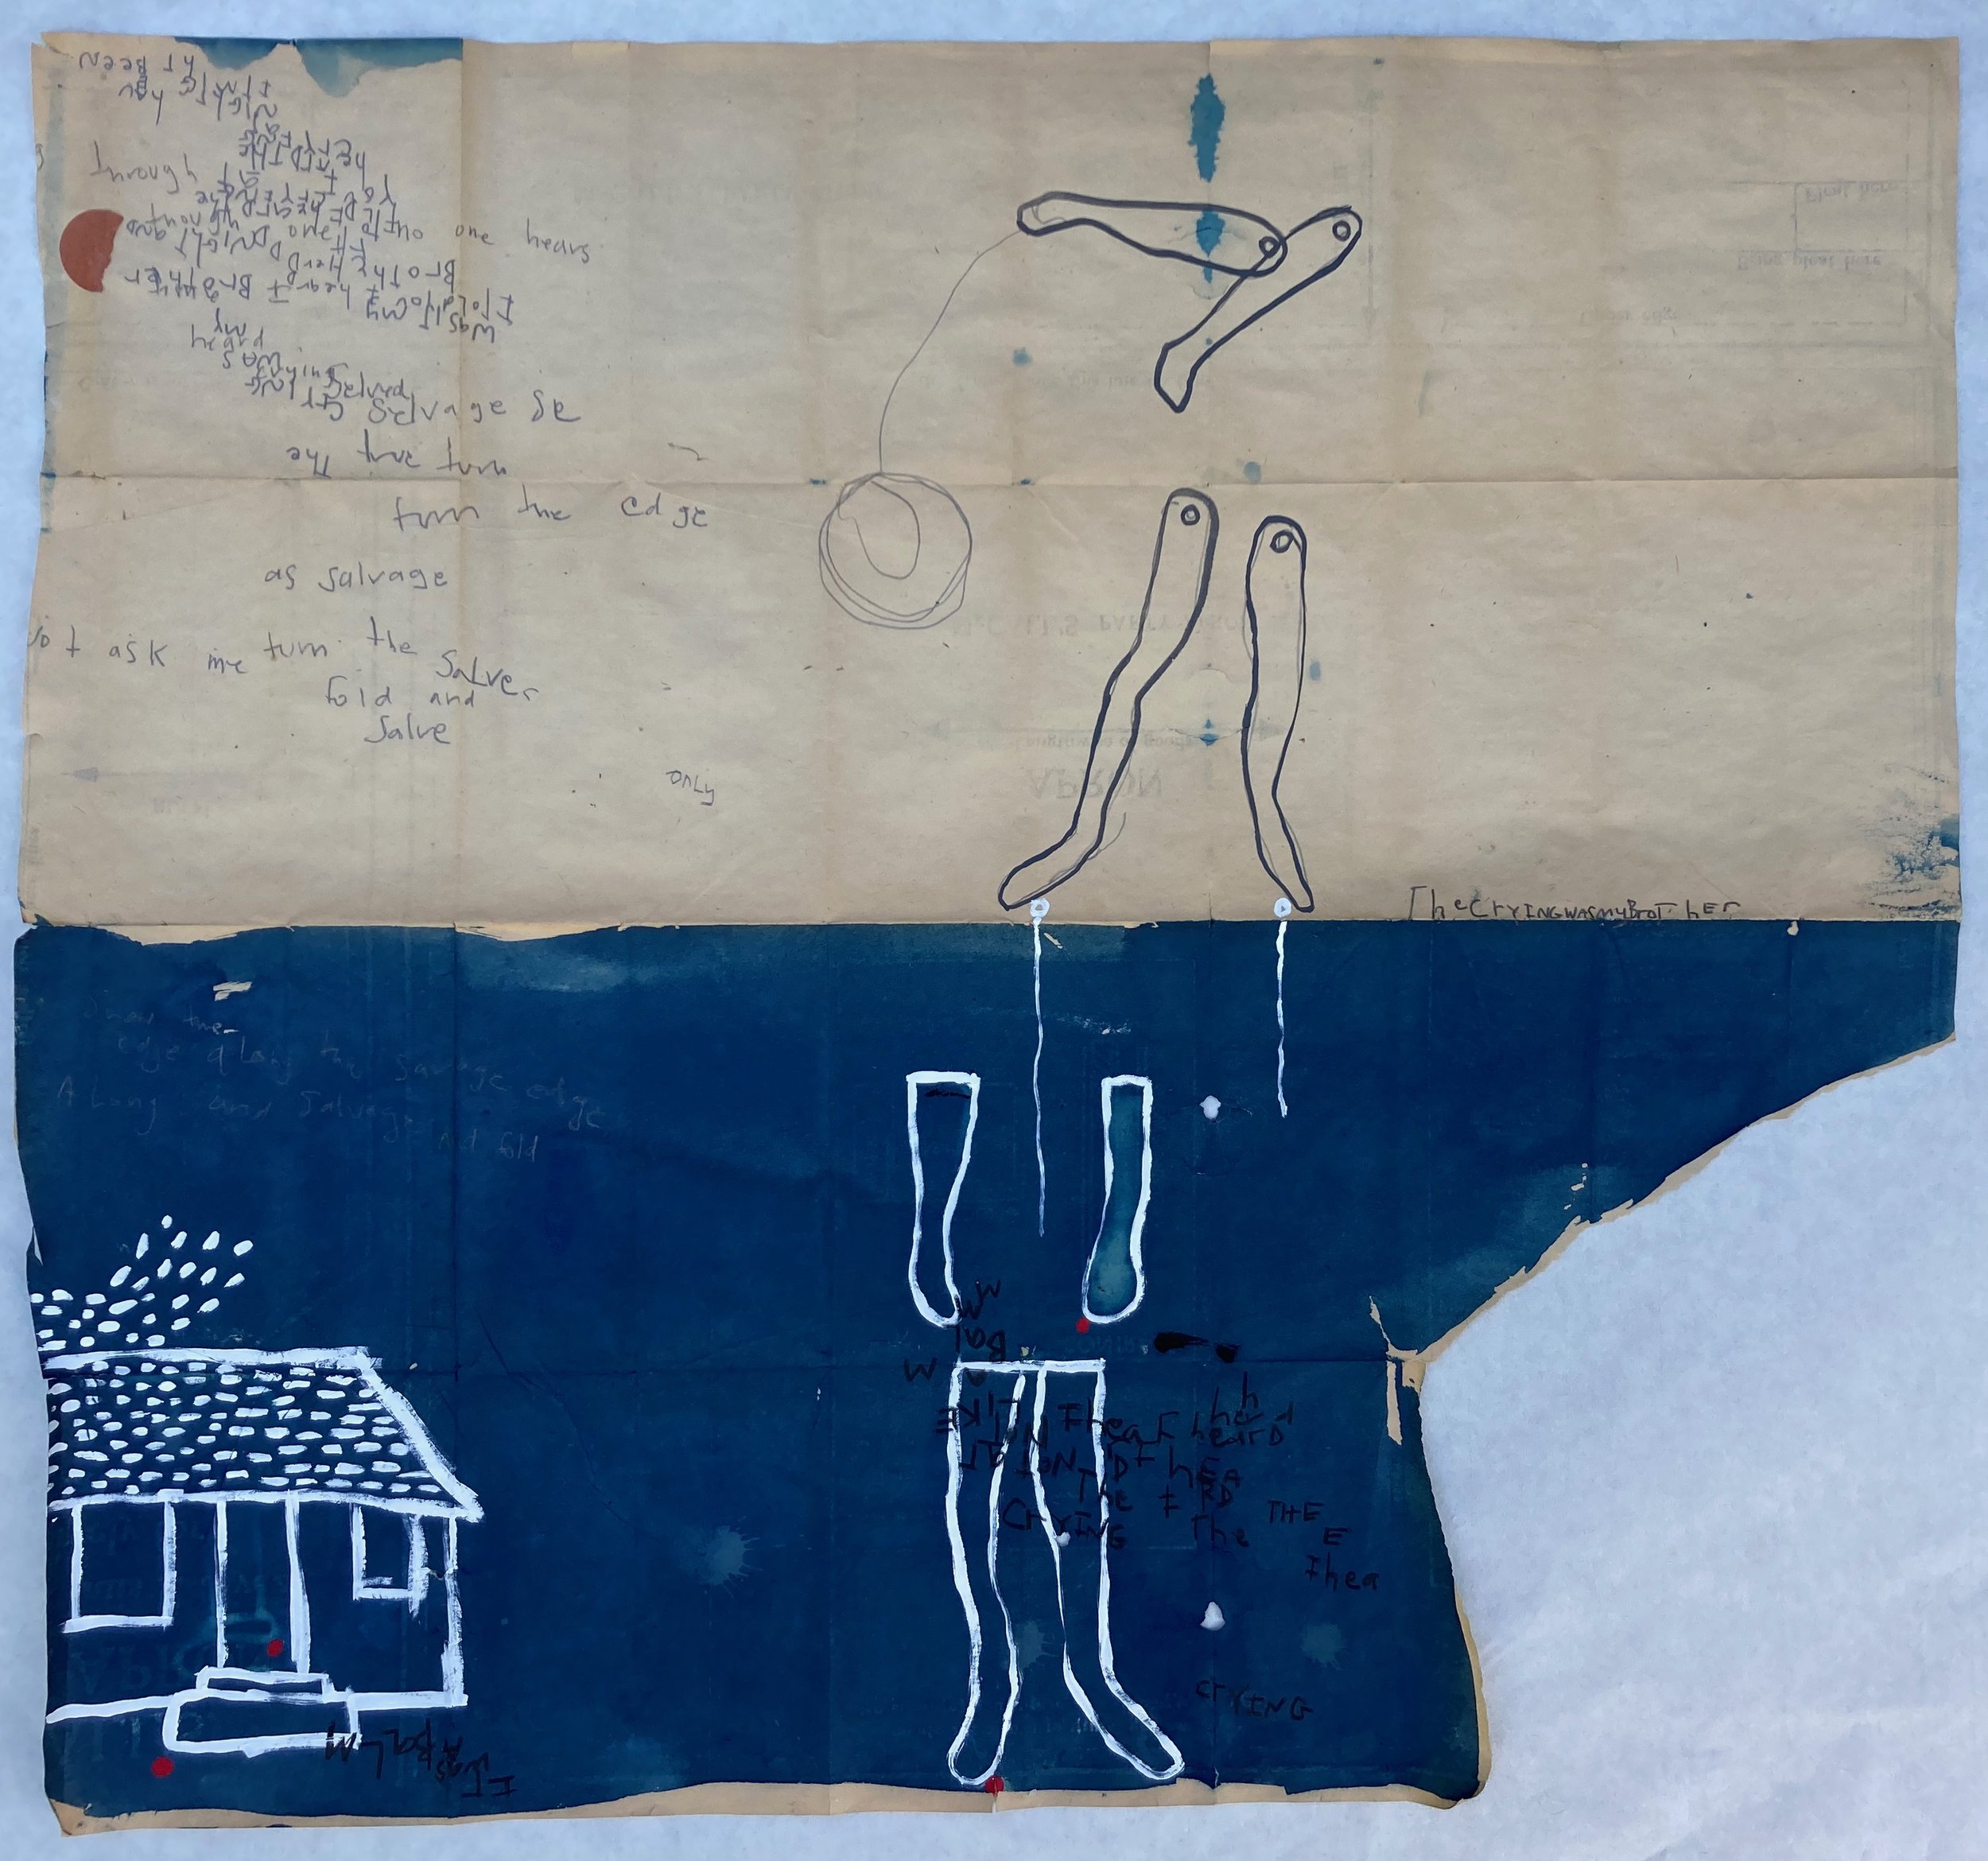   Attic | Silent | Relent , 2021. Cyanotype on vintage sewing pattern, gouache, graphite. Private Collection. 